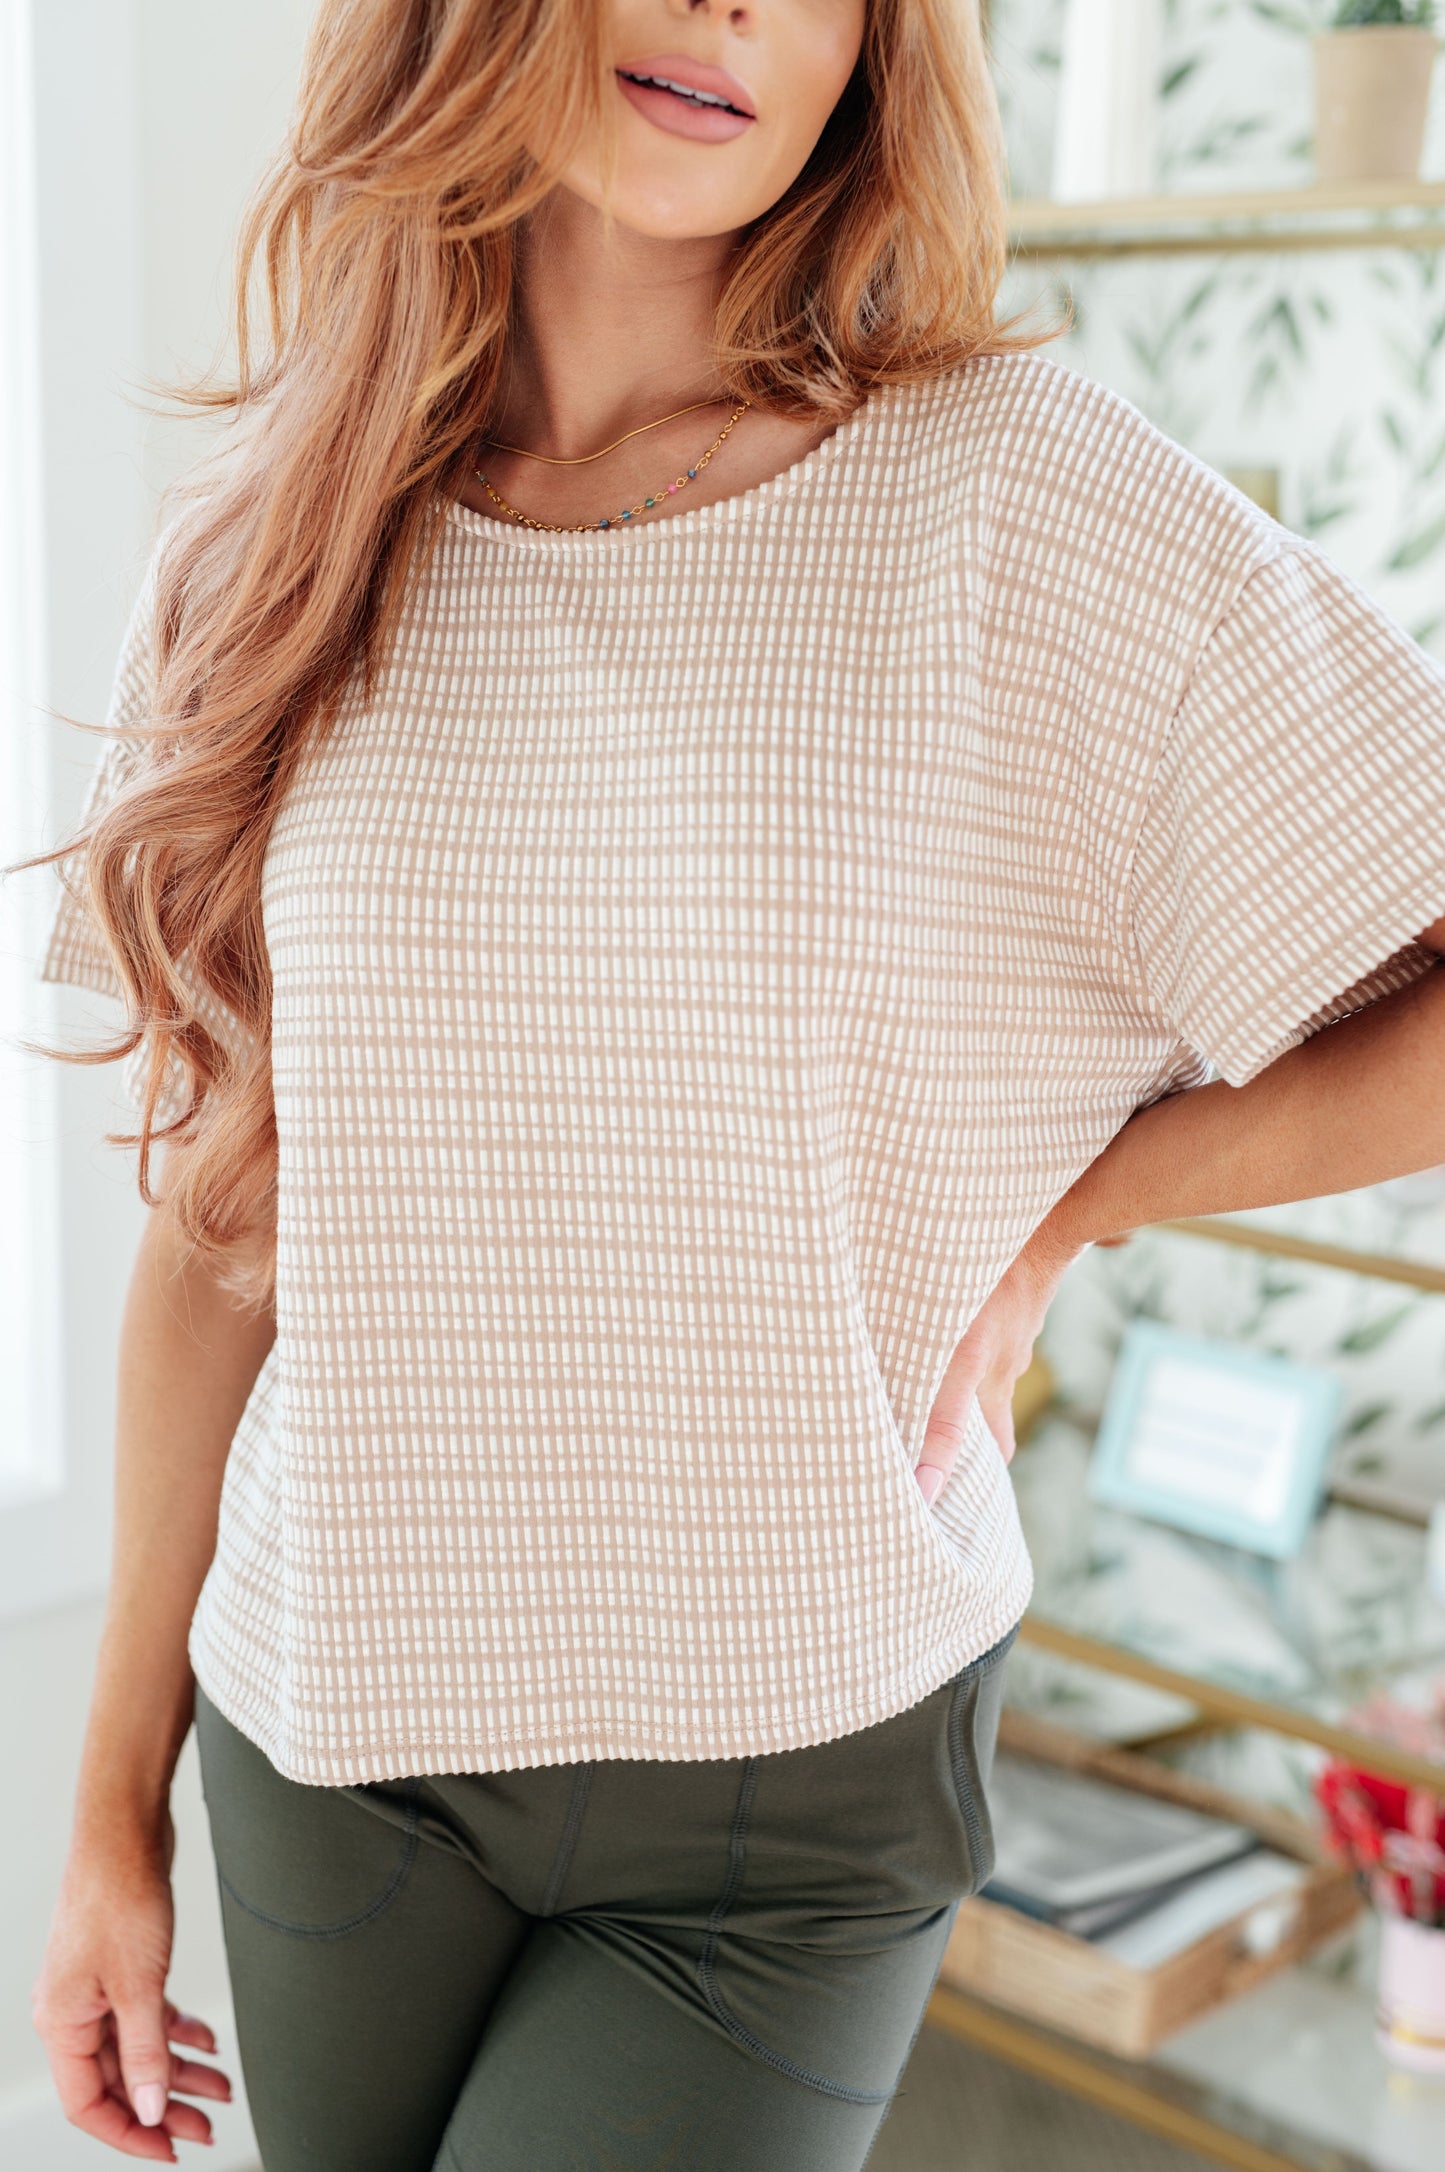 Textured Boxy Top in Taupe - Dixie Hike & Style